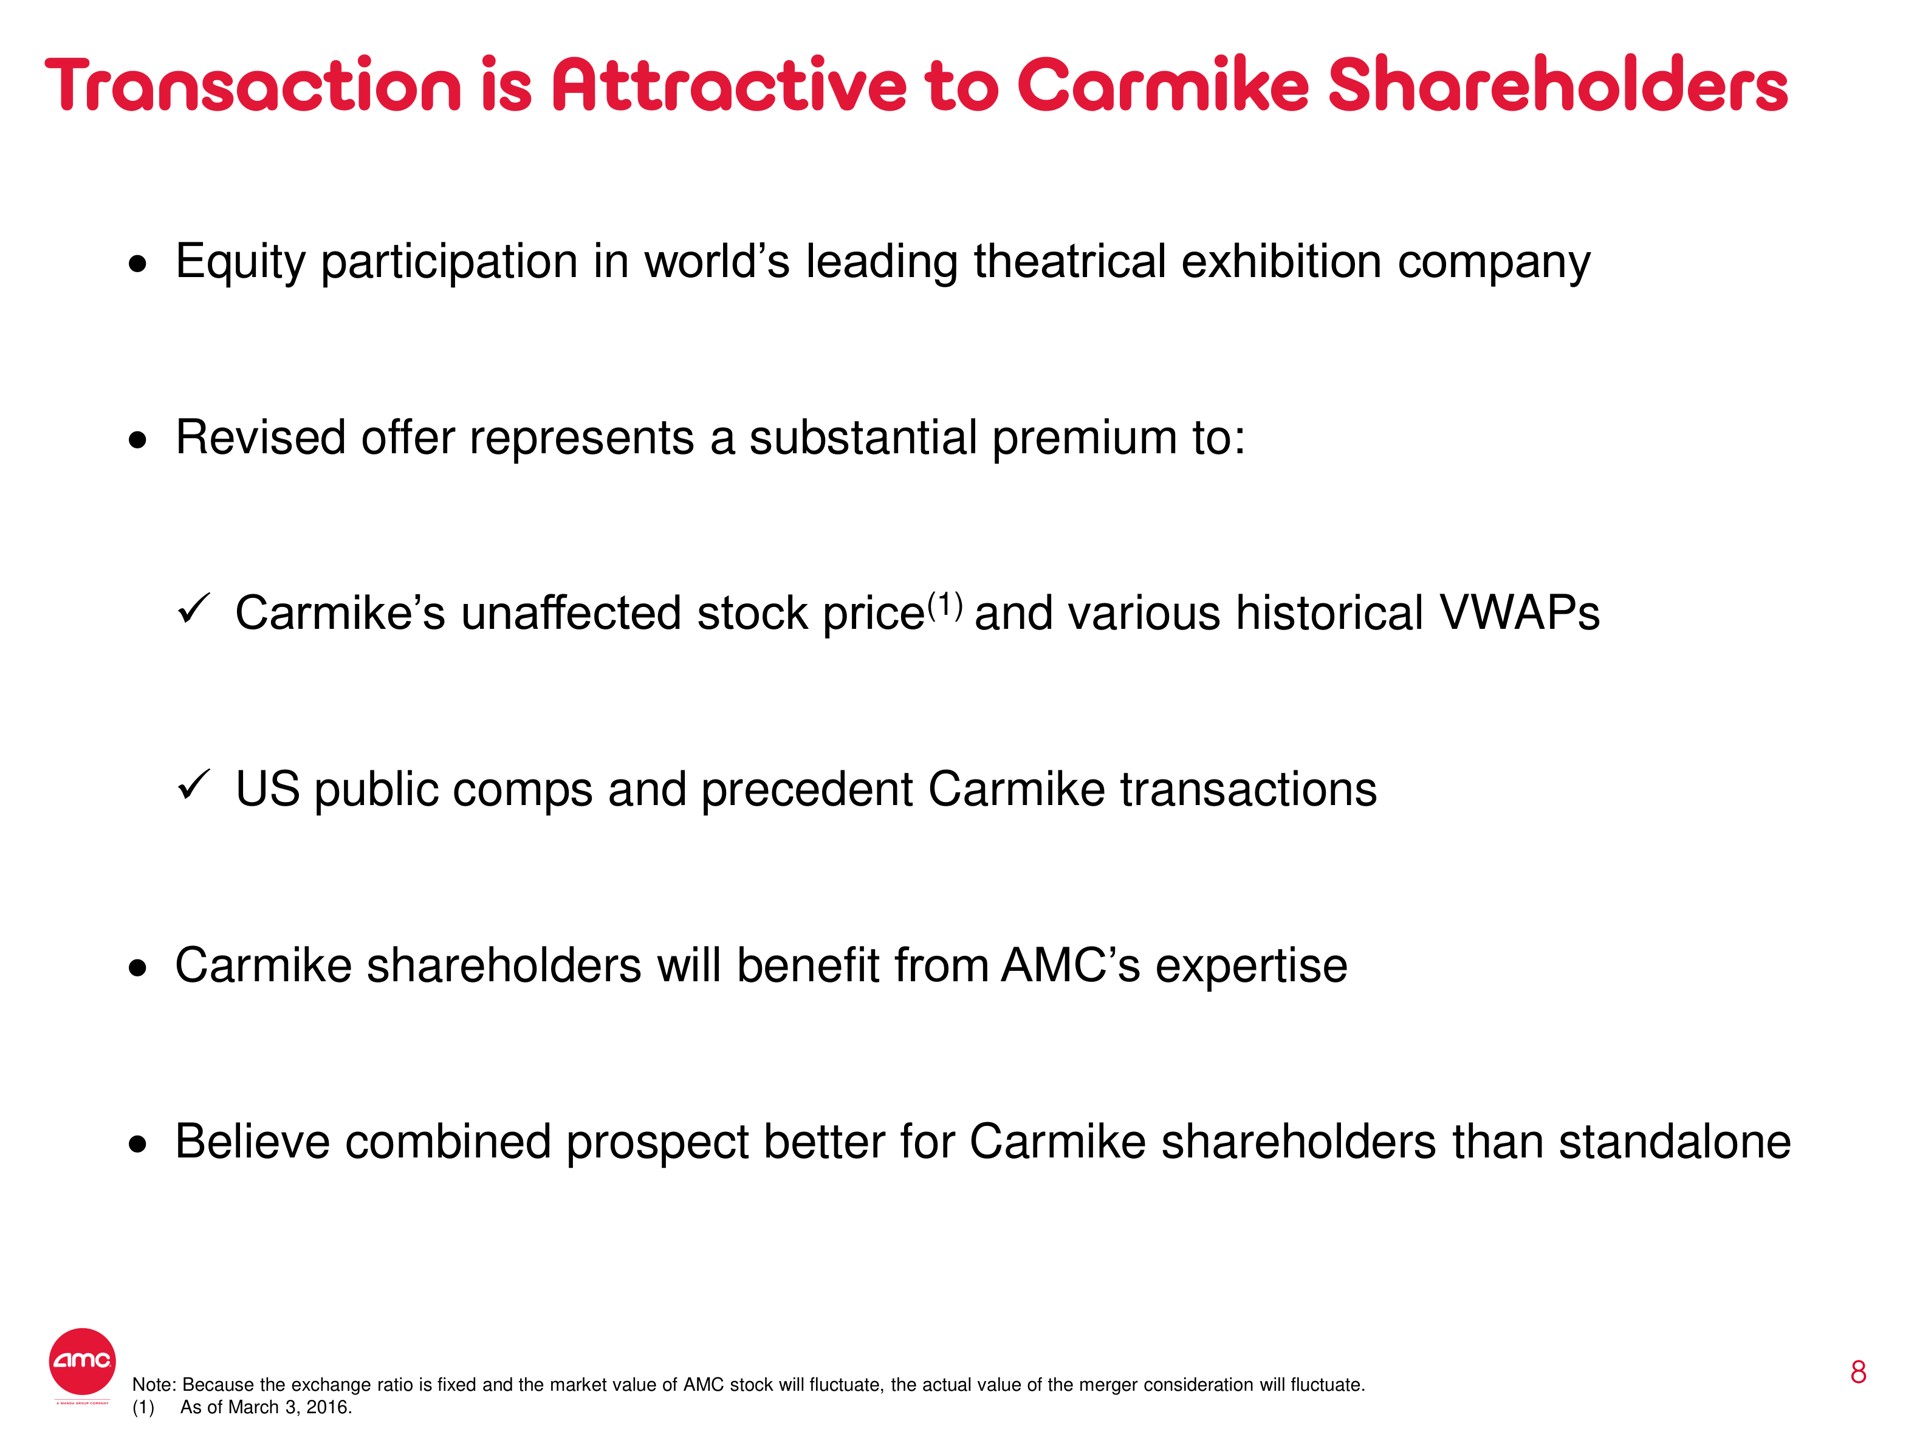 transaction is attractive to shareholders equity participation in world leading theatrical exhibition company revised offer represents a substantial premium to unaffected stock price and various historical us public and precedent transactions shareholders will benefit from believe combined prospect better for shareholders than | AMC